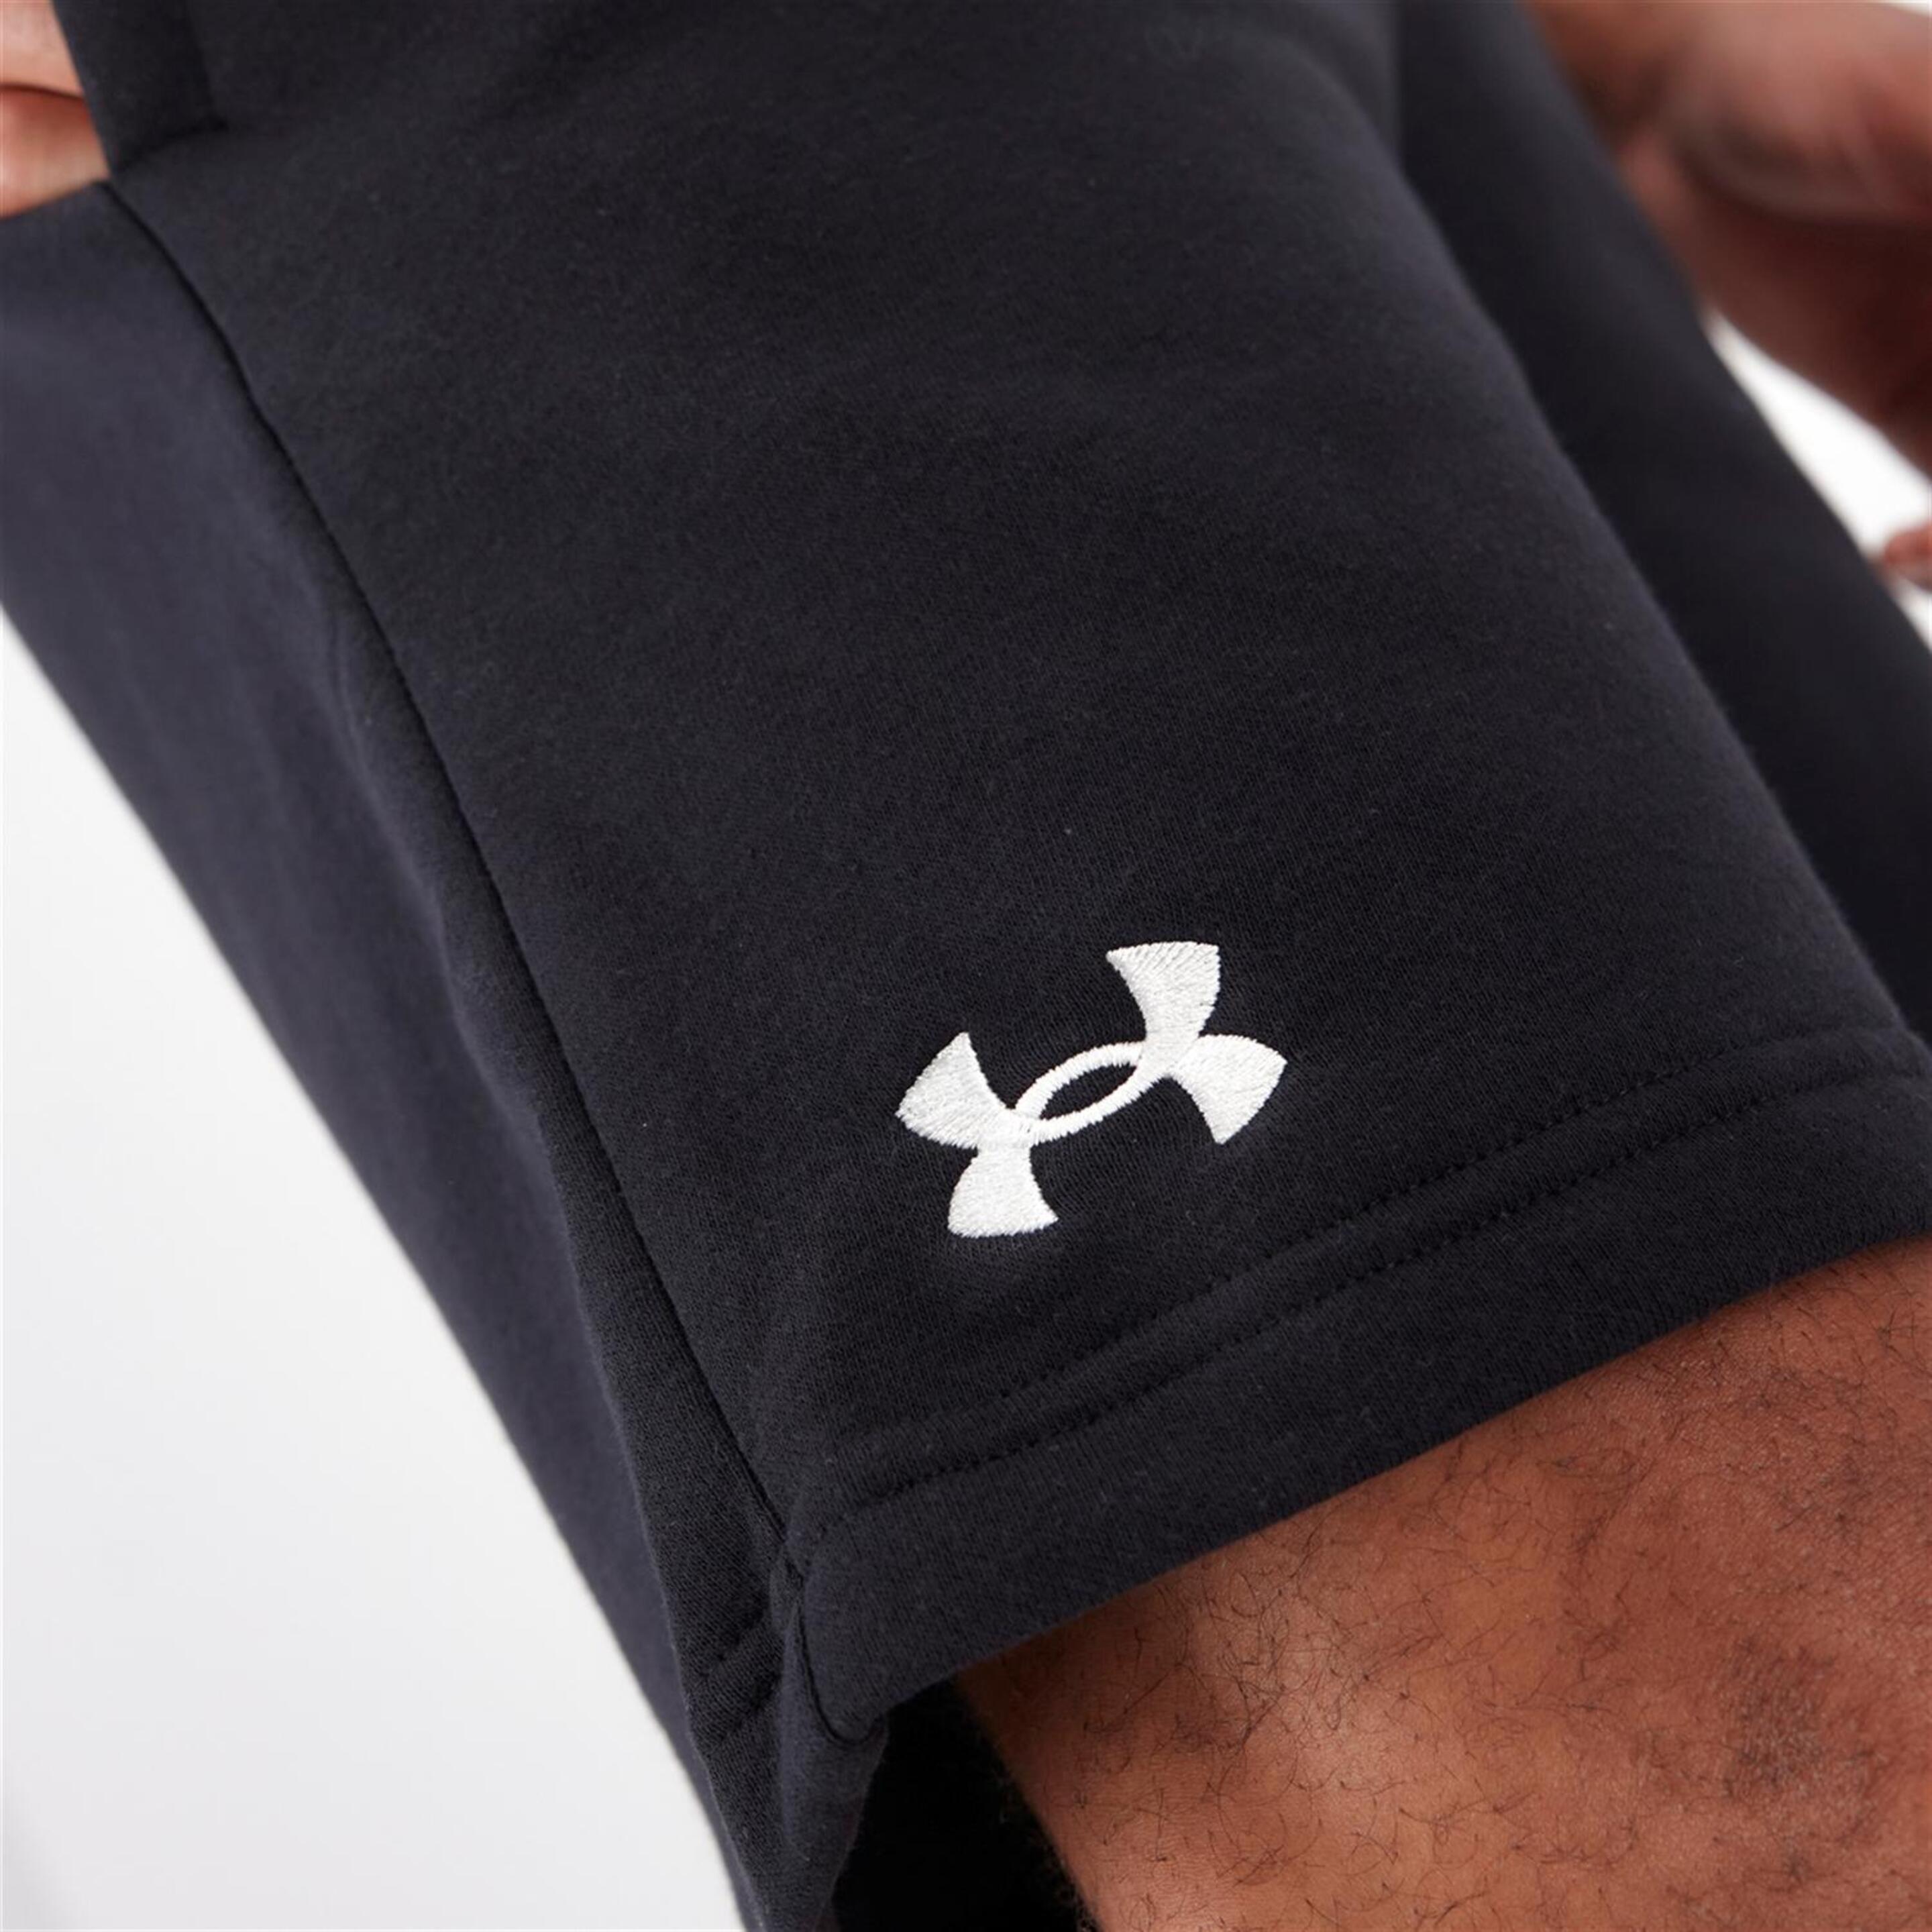 Under Armour Rival